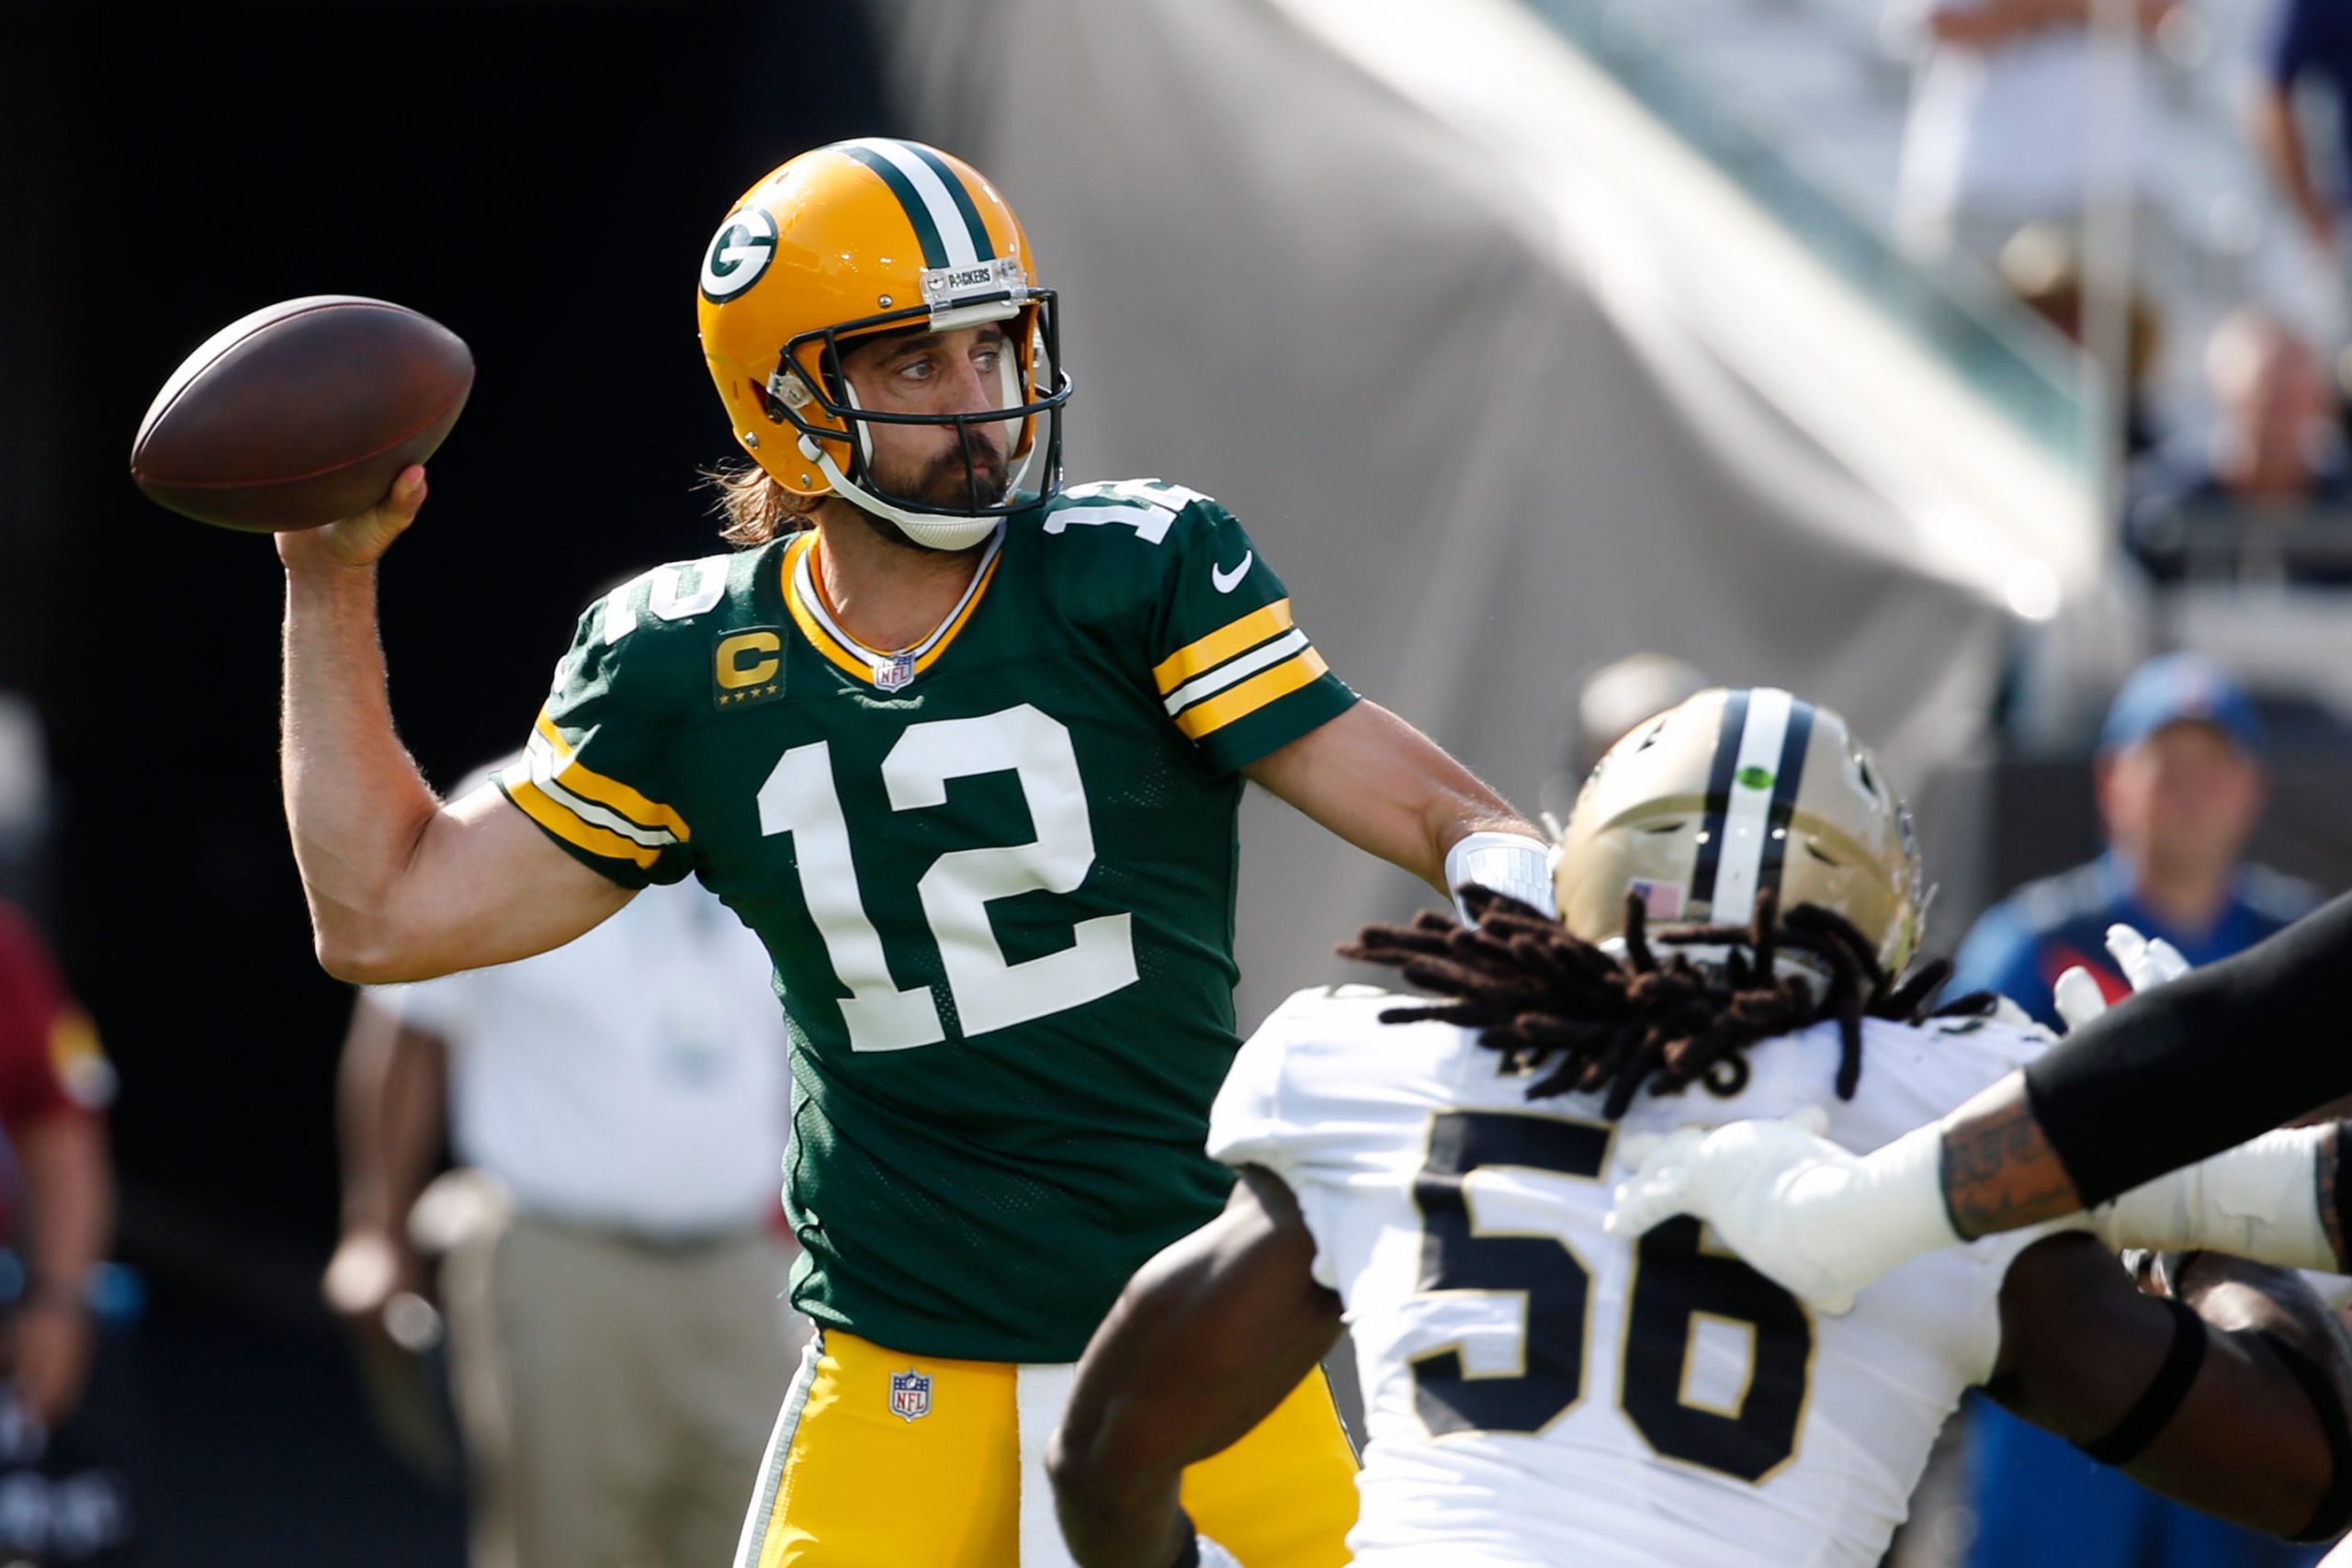 NFL: Green Bay Packers to face Detroit Lions, hopes to bury ghosts of opening loss